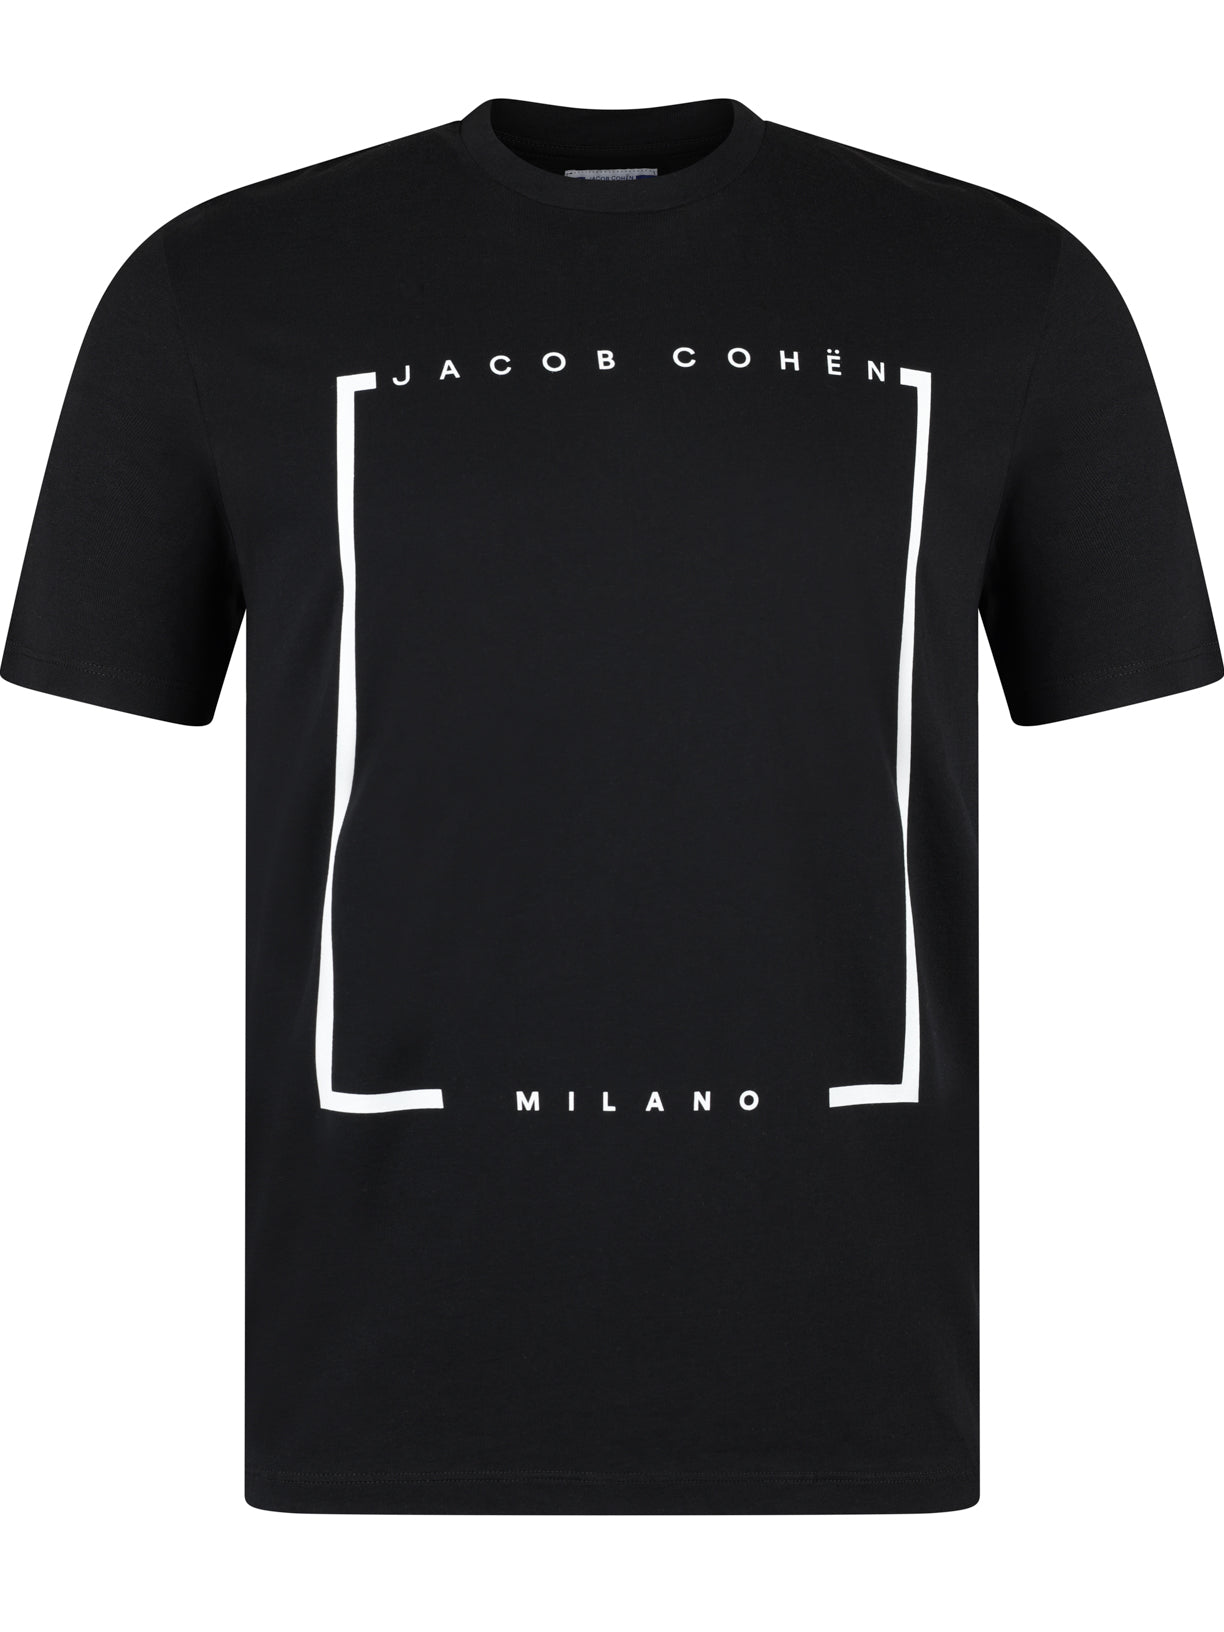 Load image into Gallery viewer, Jacob Cohen Box Milano Tee Black
